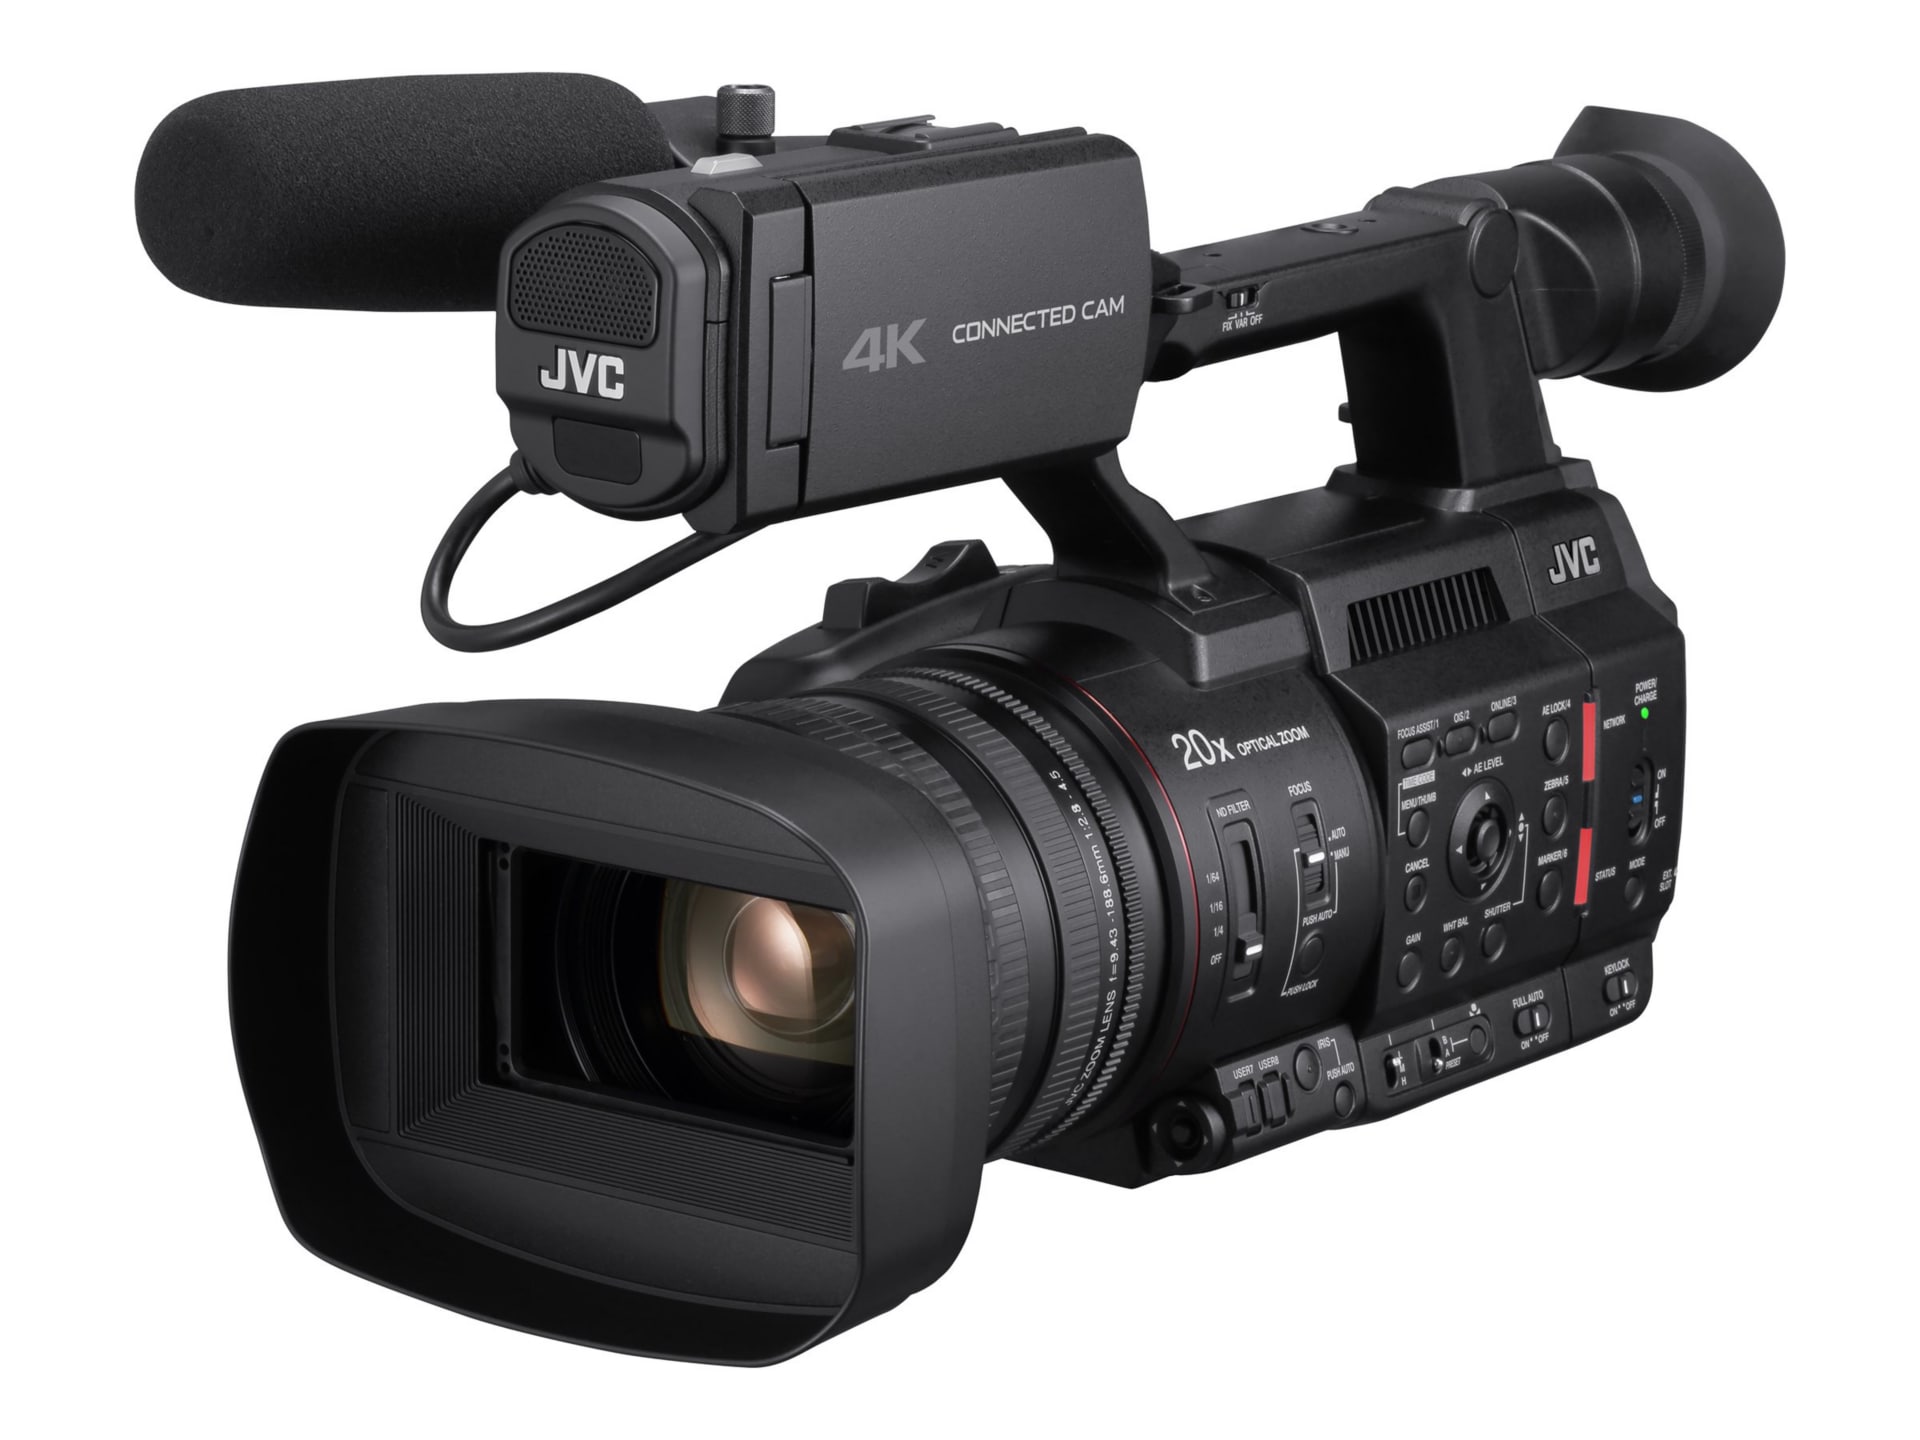 JVC CONNECTED CAM GY-HC500SPCN - camcorder - storage: flash card, solid sta